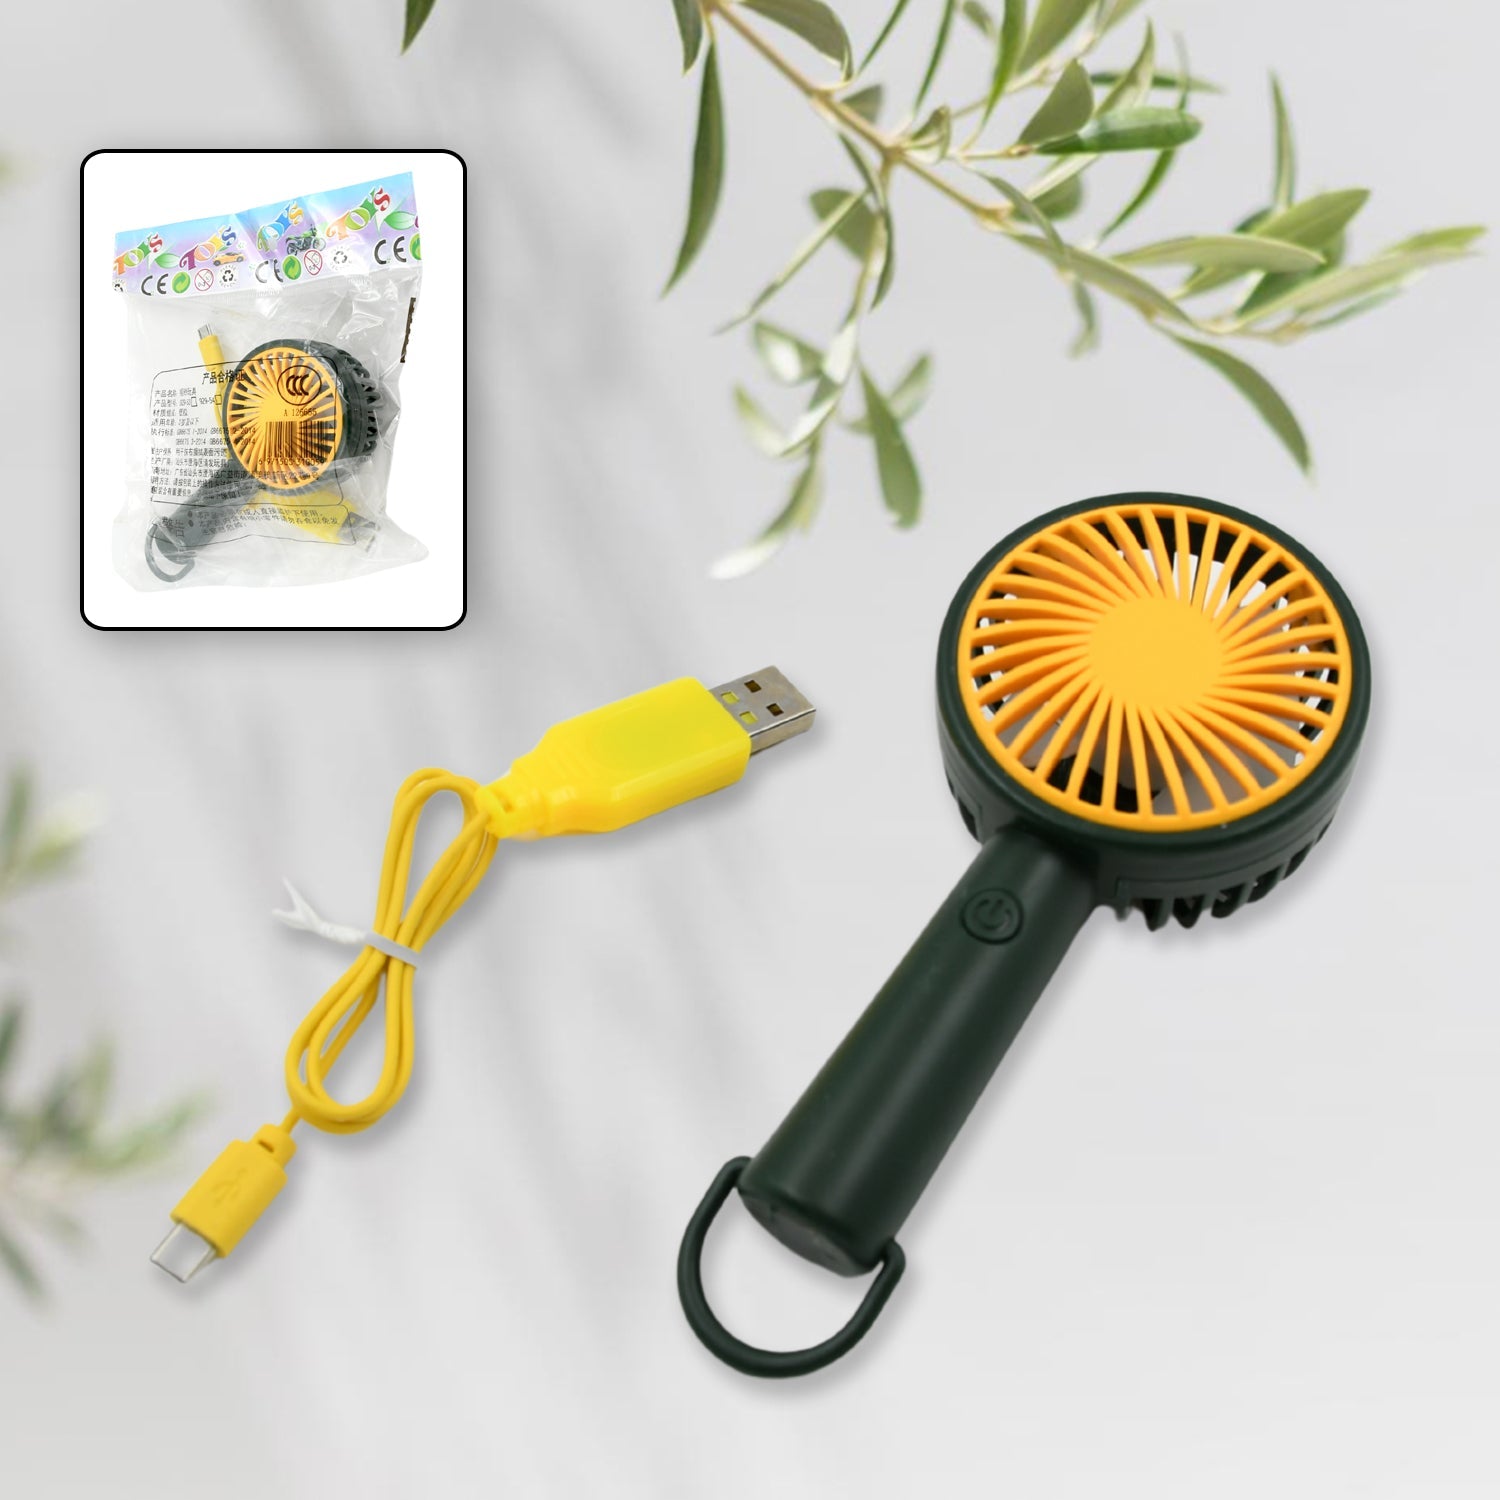 17702 Mini Handheld Fan, With Dori Easy to carry Portable Rechargeable Mini Fan Easy to Carry, for Home, Office, Travel and Outdoor Use (Battery Not Included / 1 Pc)